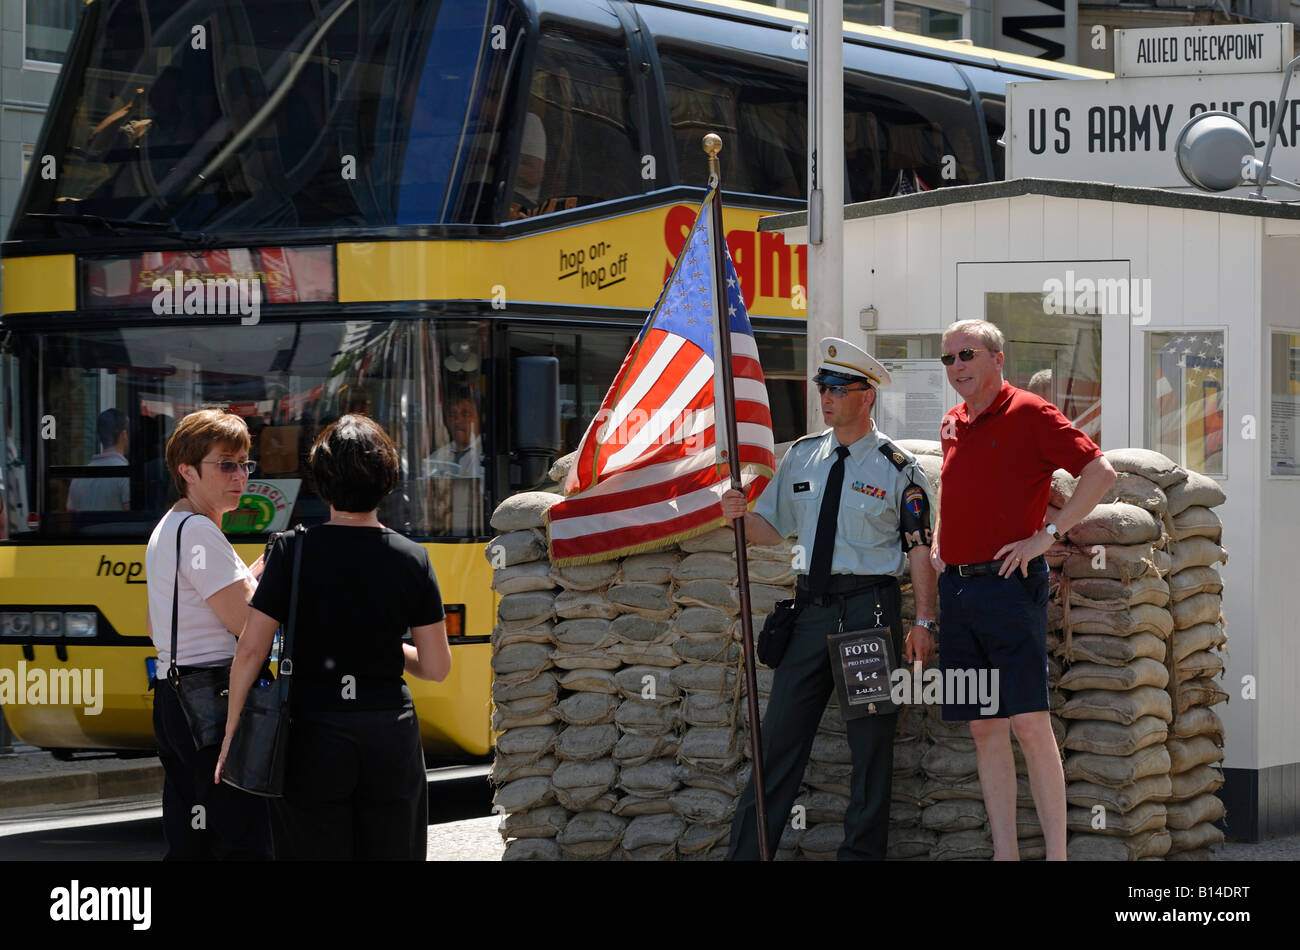 Berlin. Checkpoint Charlie today. Allied forces frontier control point. Actor as American soldier posing with tourists. Stock Photo